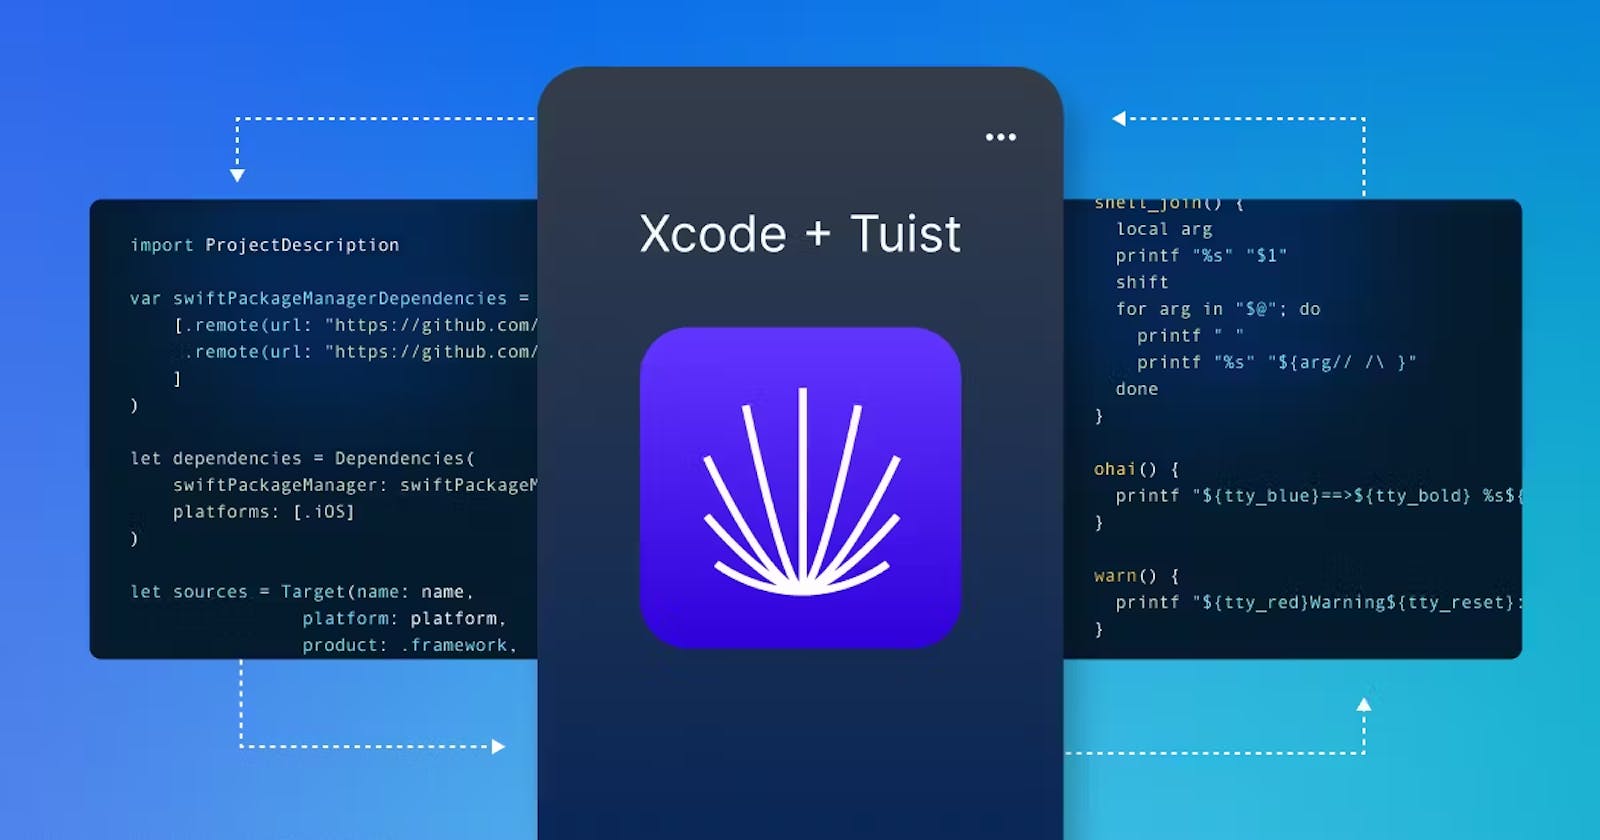 Real-World Xcode Project Using Tuist